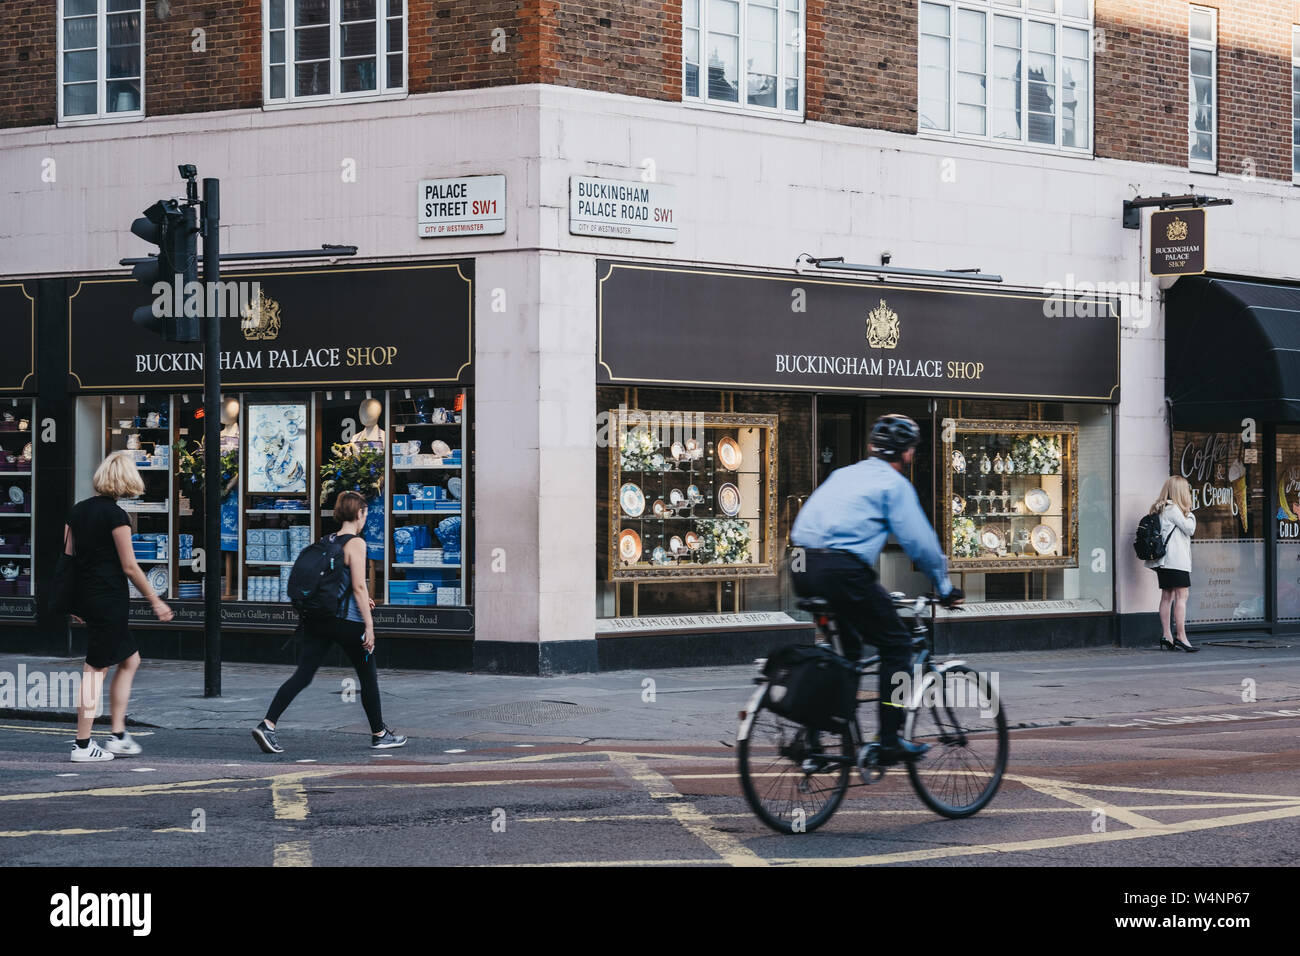 London, UK - July 15, 2019: Pedestrians and cyclist in front of Buckingham Palace Shop, London, a Royal shop for gifts, collections and commemorative Stock Photo